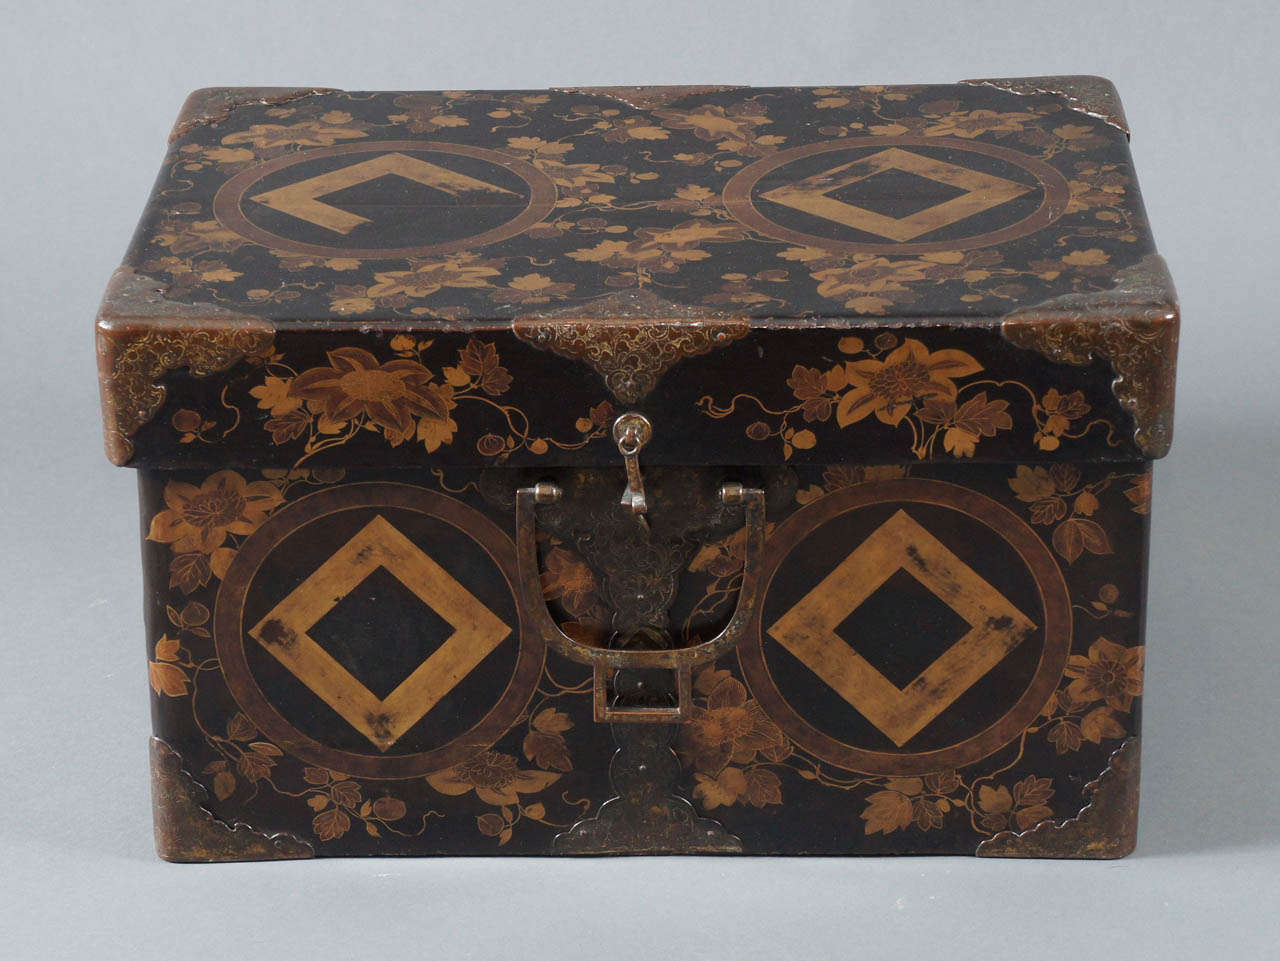 Black Lacquer Kimono Box
Vine and Mon Design (family crest) in gold with Bronze mounts.
Decoration on inside of lid.
Lid served as a tray for presentation of Kimono.

Pick up location:
Naga North
536 Warren Street
Hudson, NY 12534